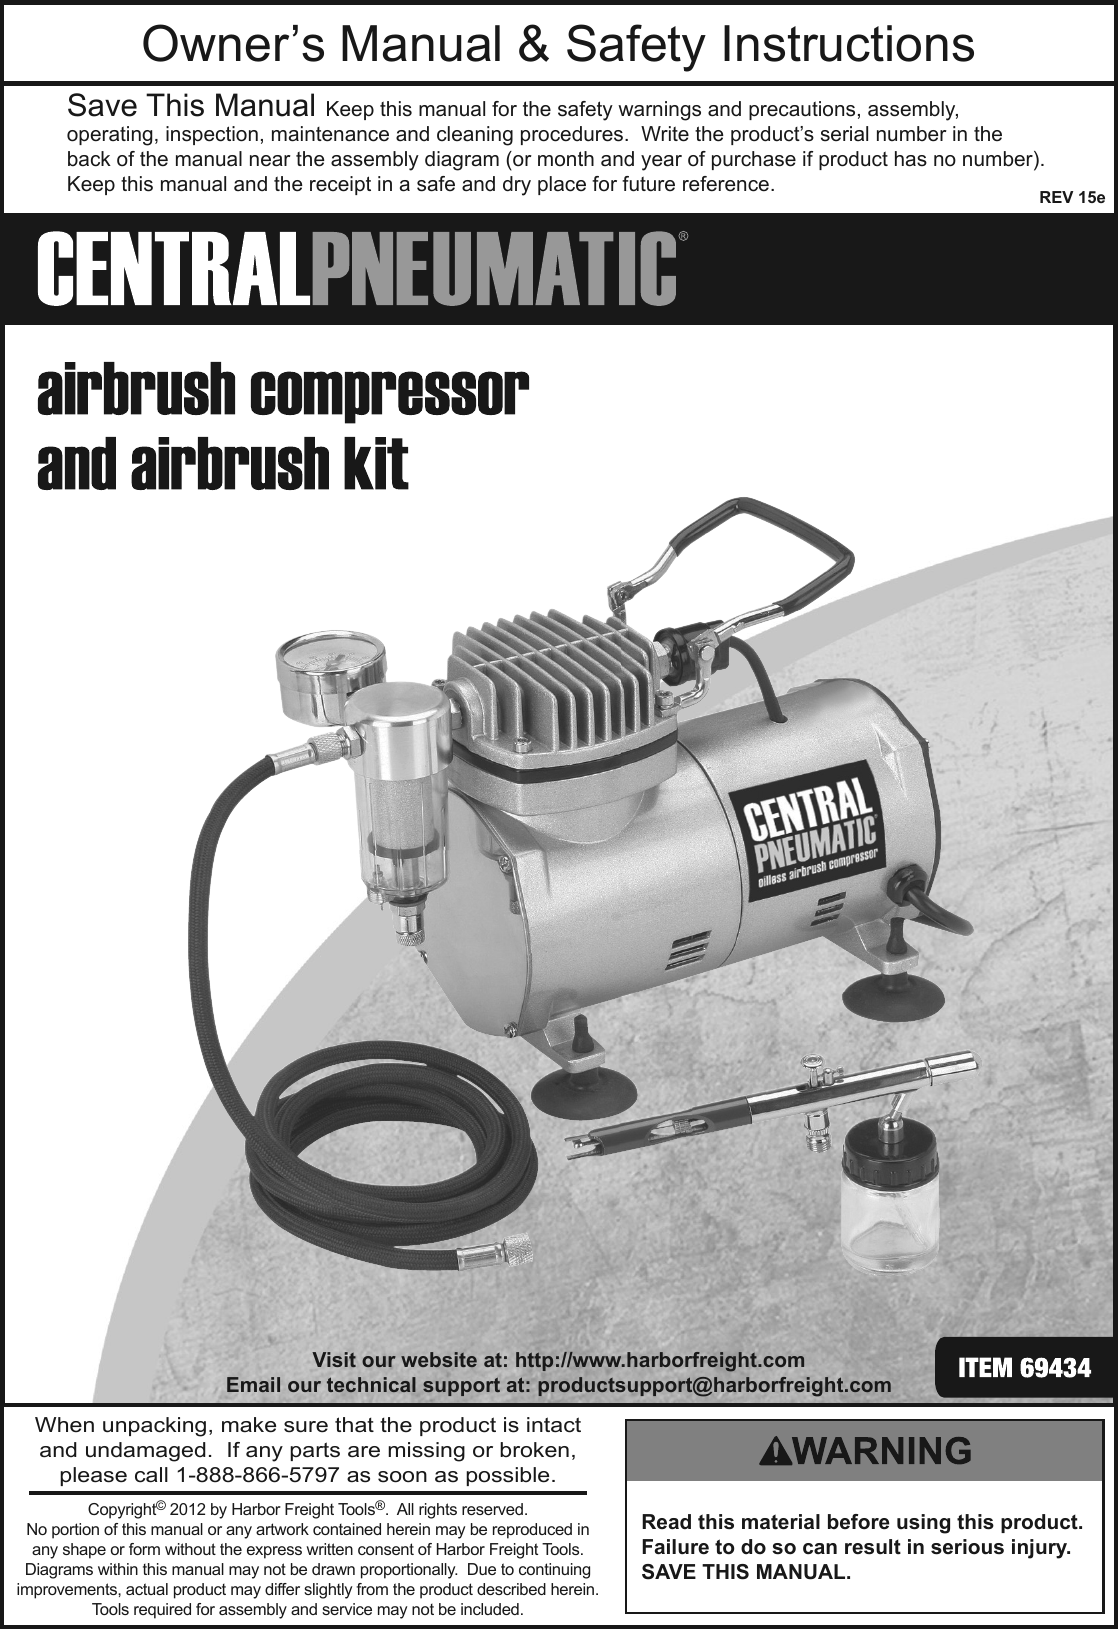 Page 1 of 12 - Manual For The 69434 1/5 Horsepower, 58 PSI Airbrush Compressor And Kit